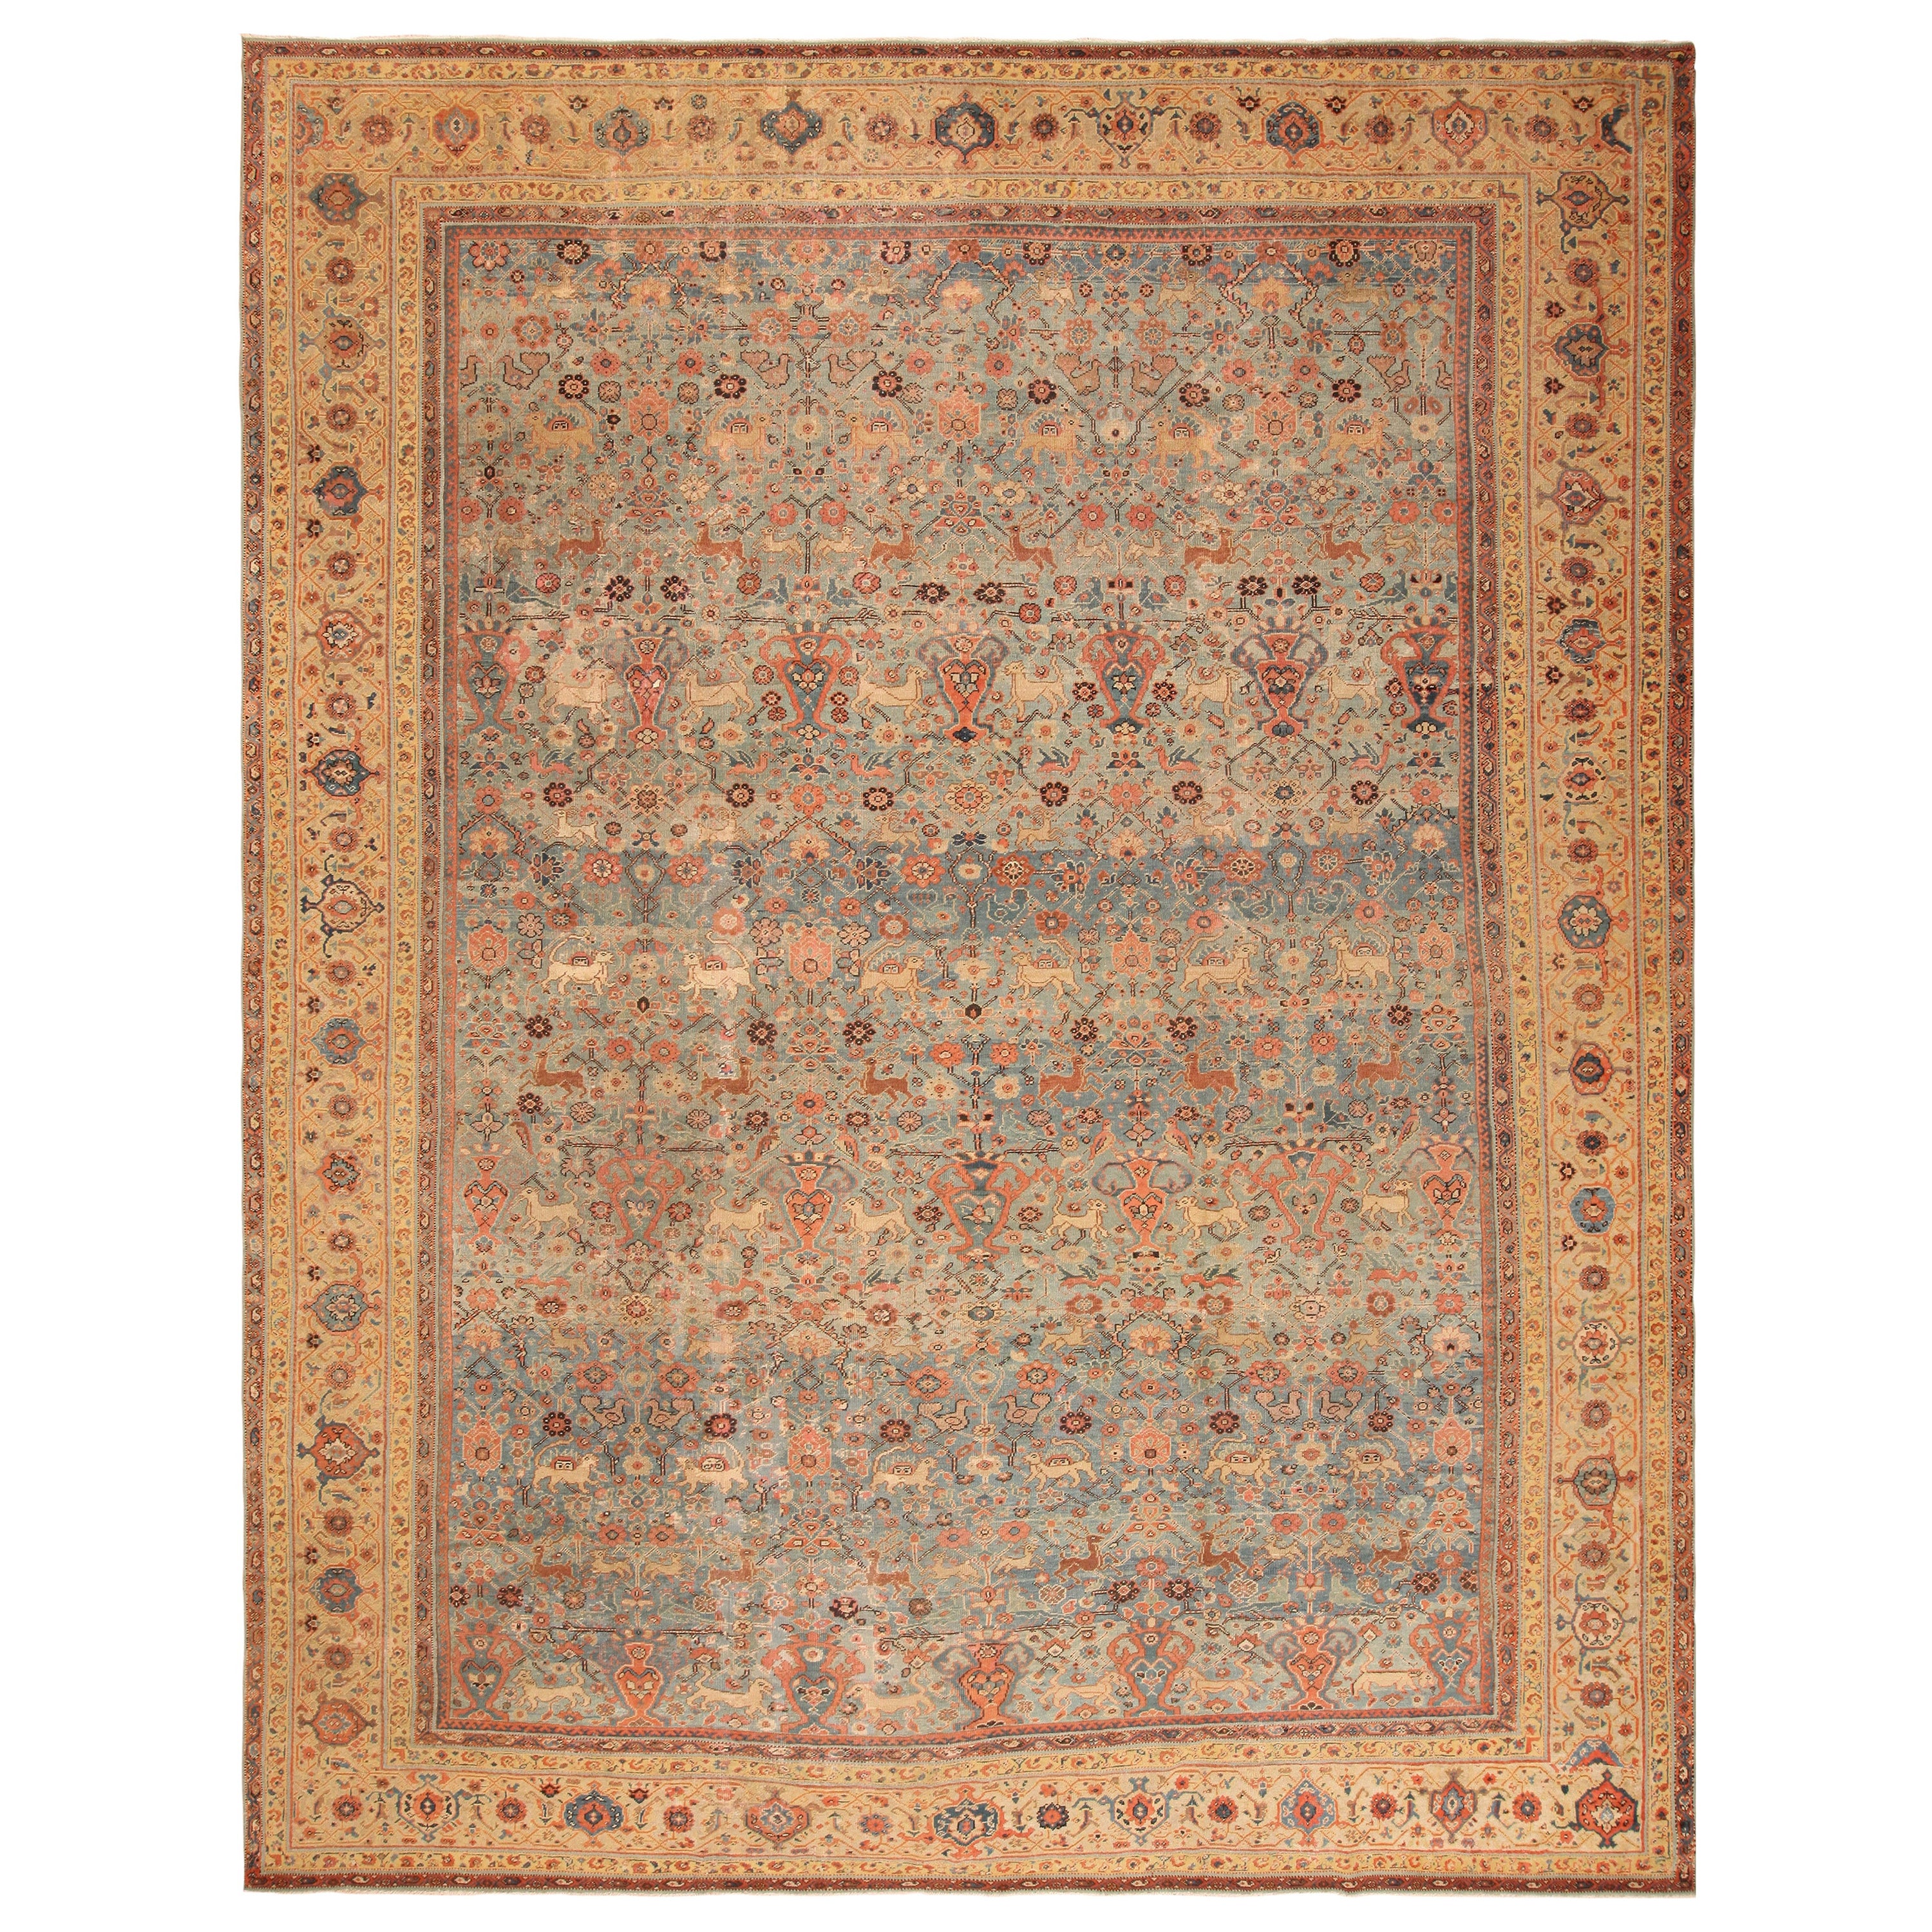 Antique Persian Sultanabad Rug. 12 ft 8 in x 16 ft